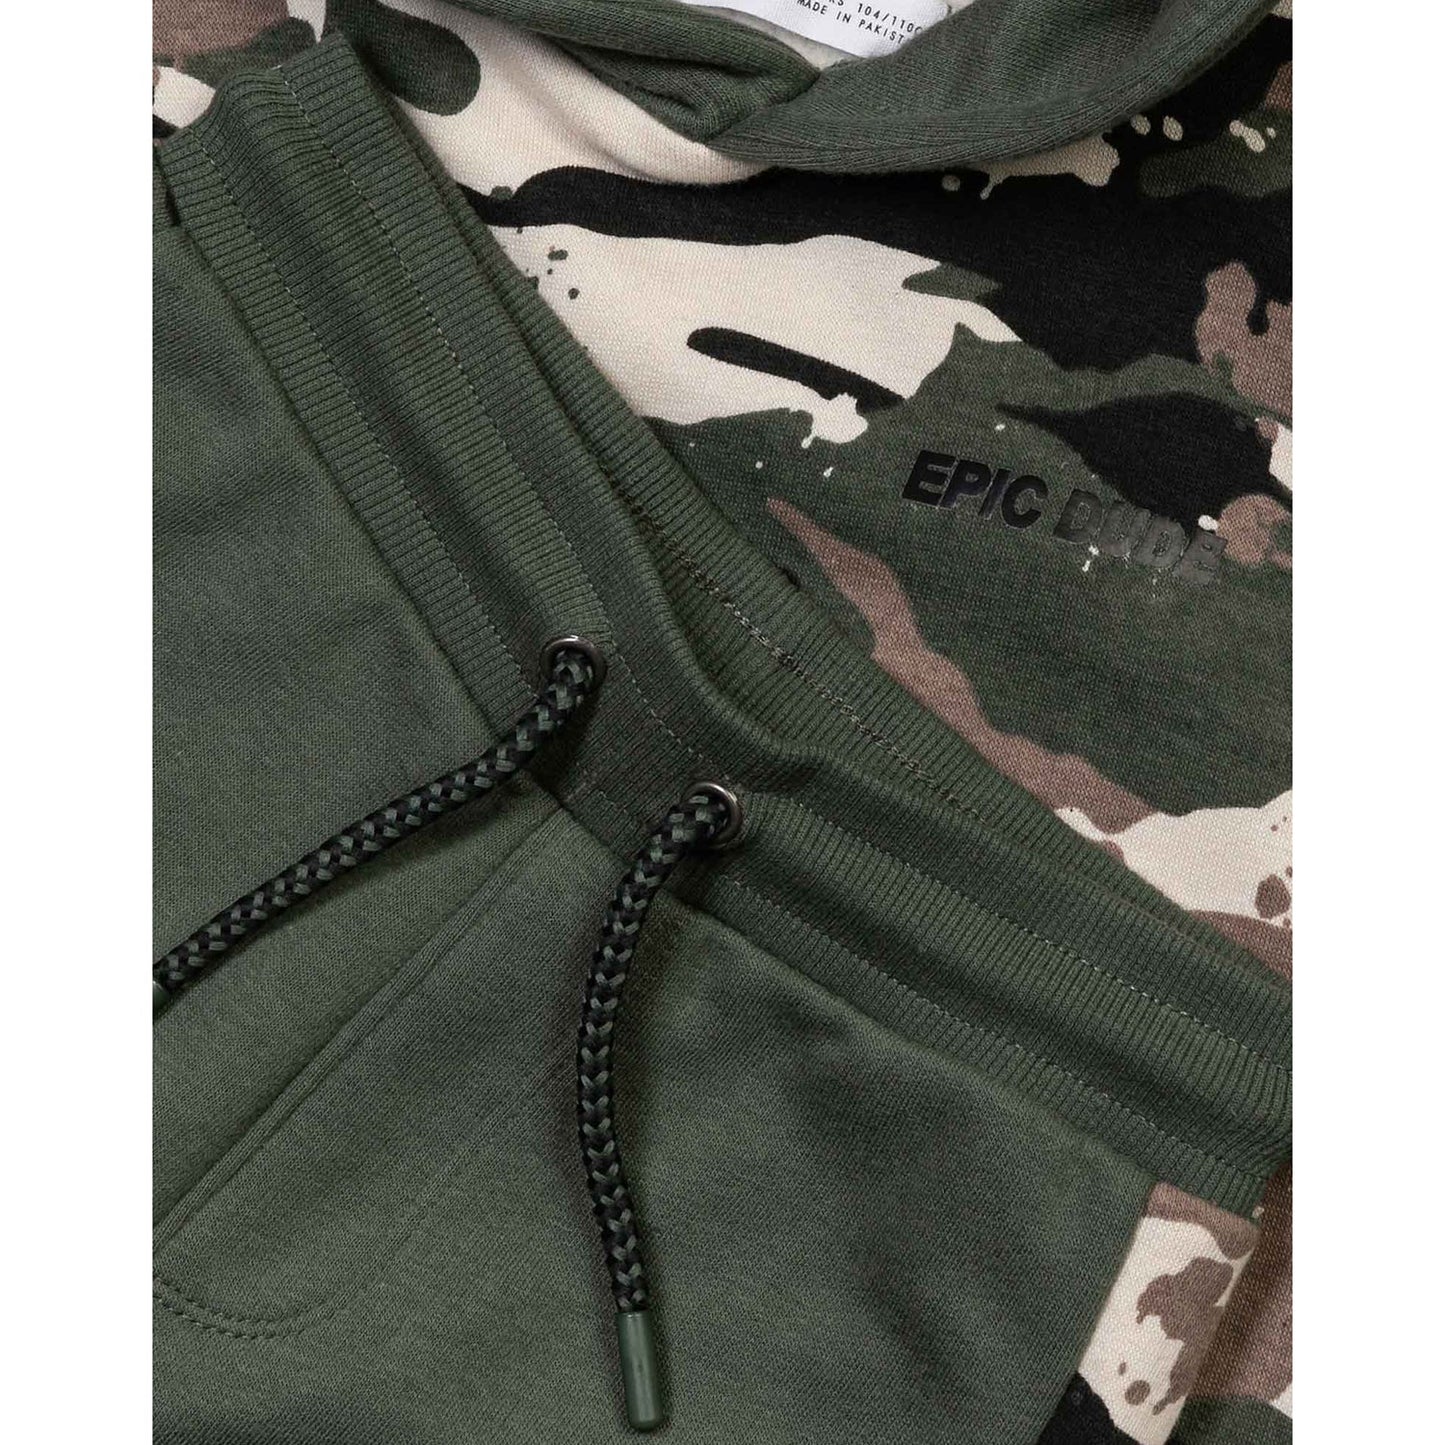 Boys Camouflage Printed Tracksuit